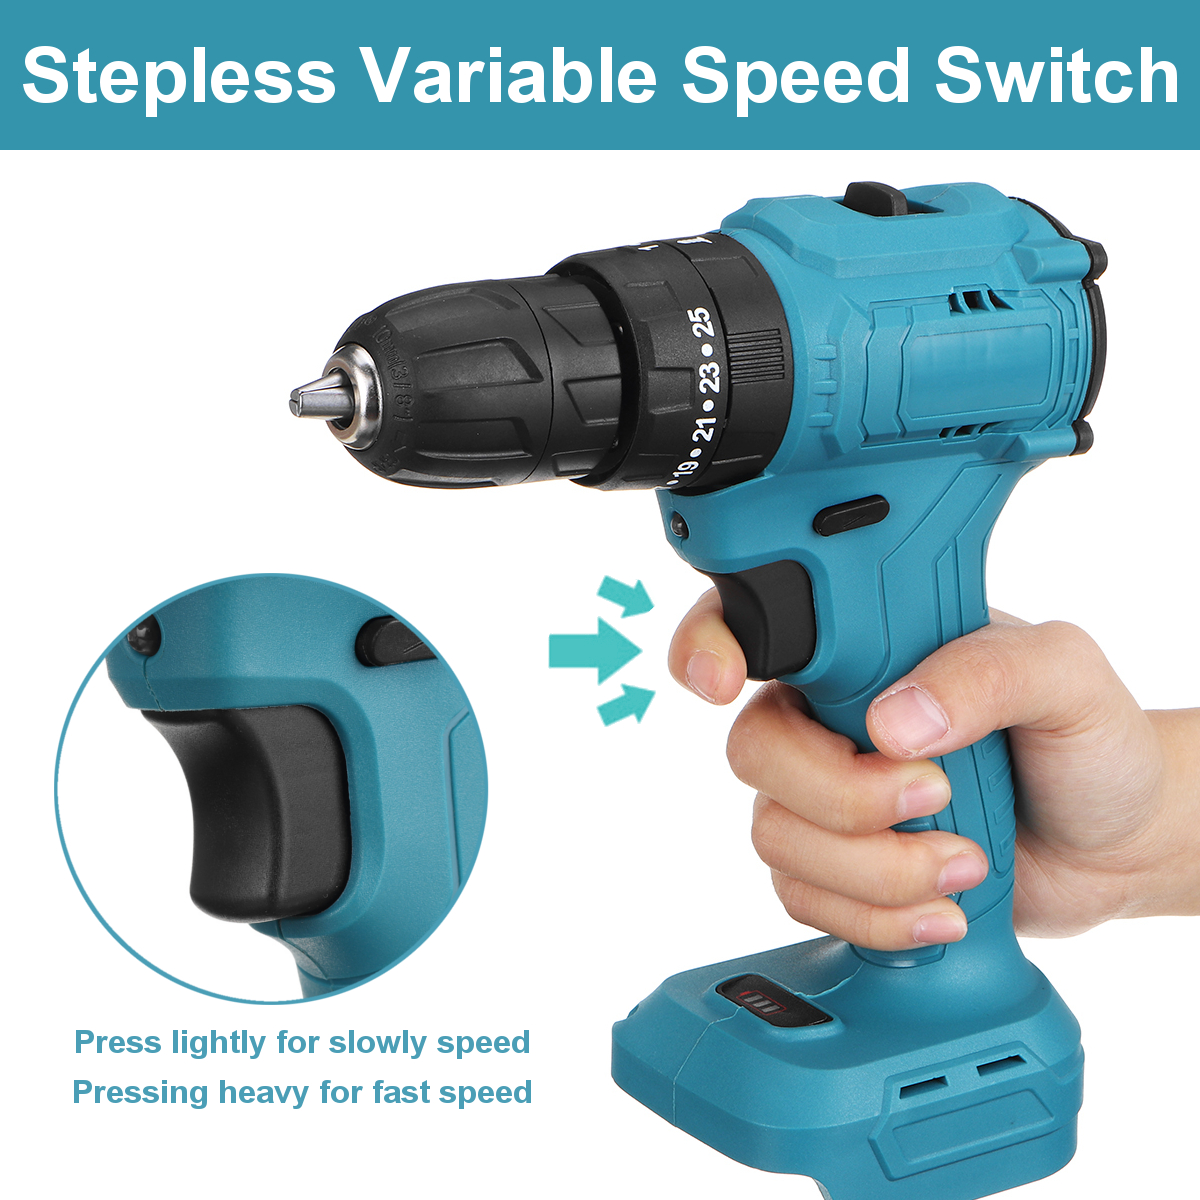 520Nm-Brushless-Cordless-38-Electric-Impact-Drill-Driver-Replacement-for-Makita-18V-Battery-1733295-3